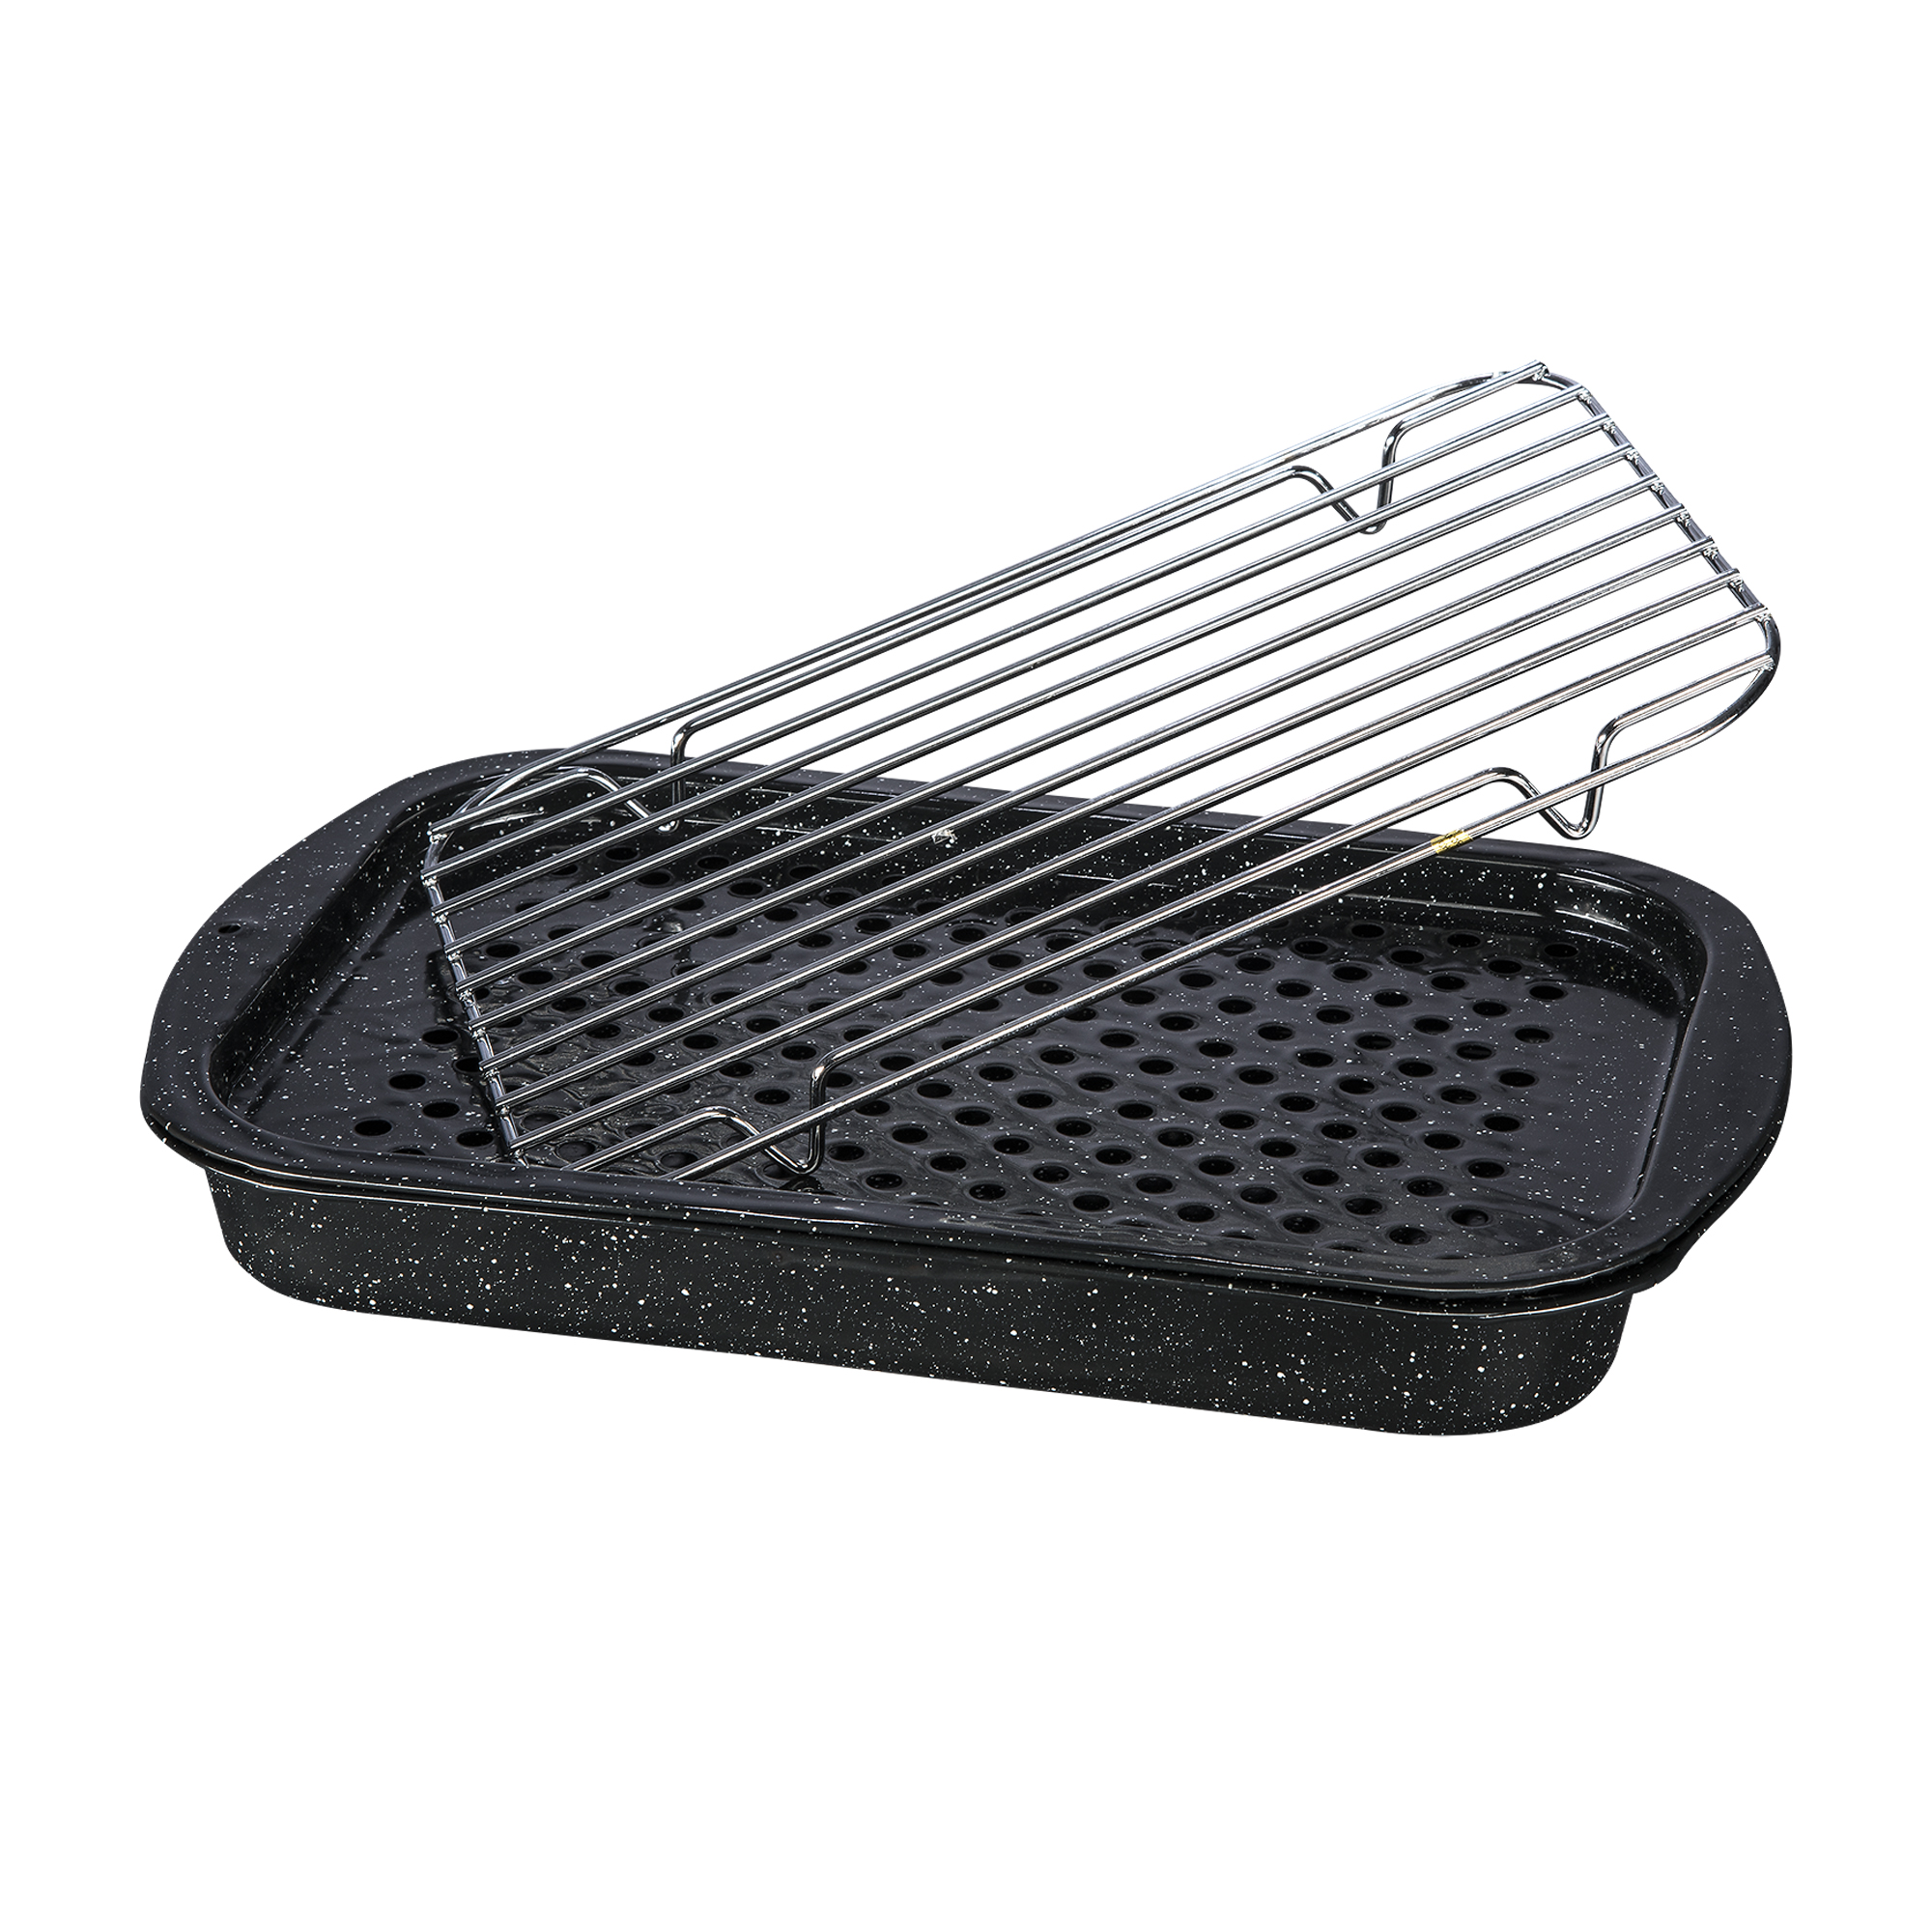 Granite Ware 3 piece multiuse set. Enameled steel bake, broiler pan, and grill with rack. Versatile for oven and direct fire cooking. Resists up to 932°F - image 1 of 6